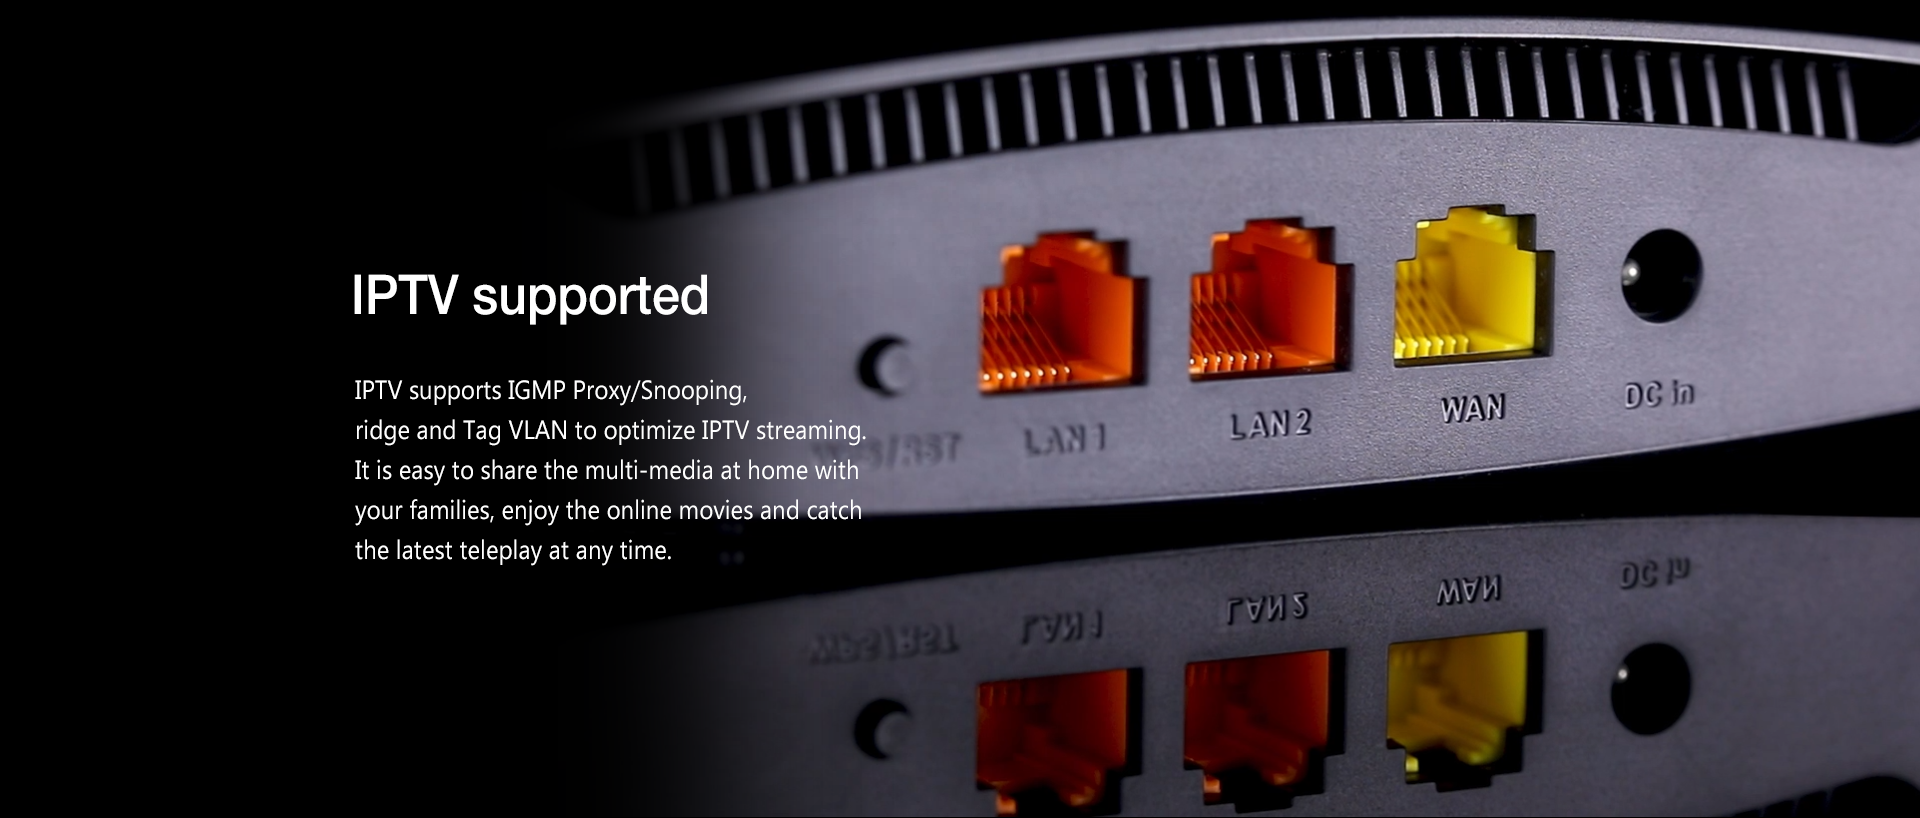 IPTV Supported Router 